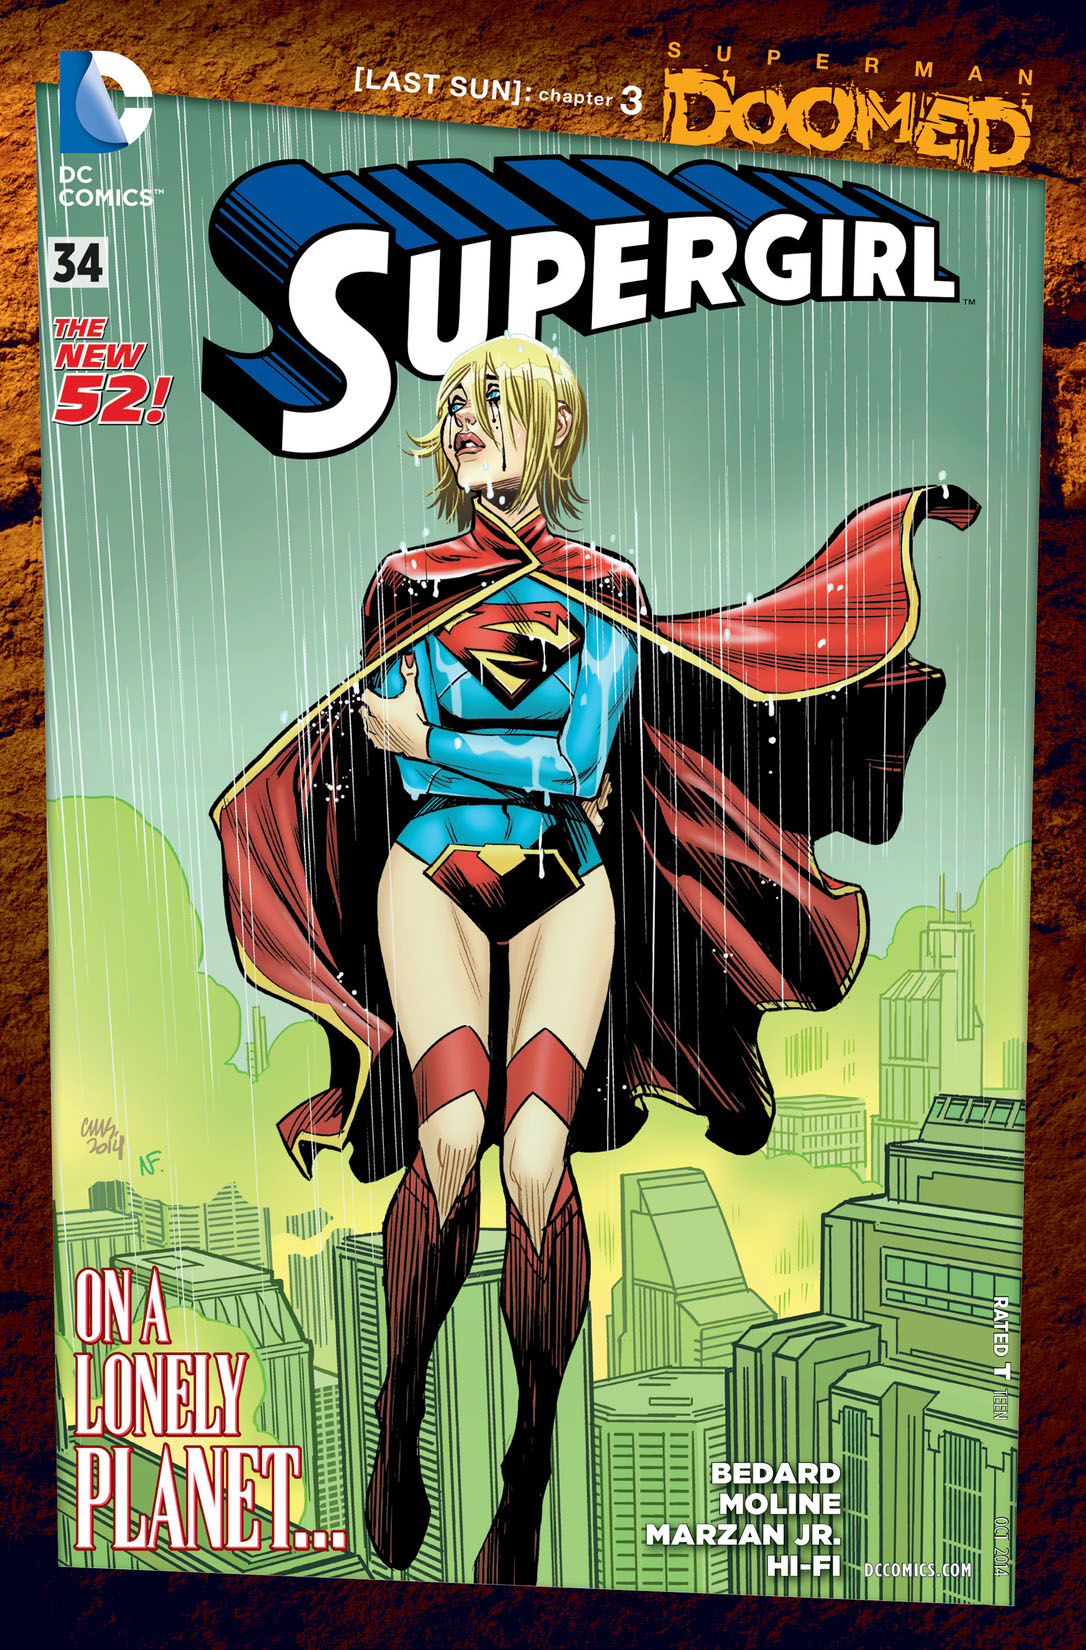 Supergirl (2011-) #34 preview images